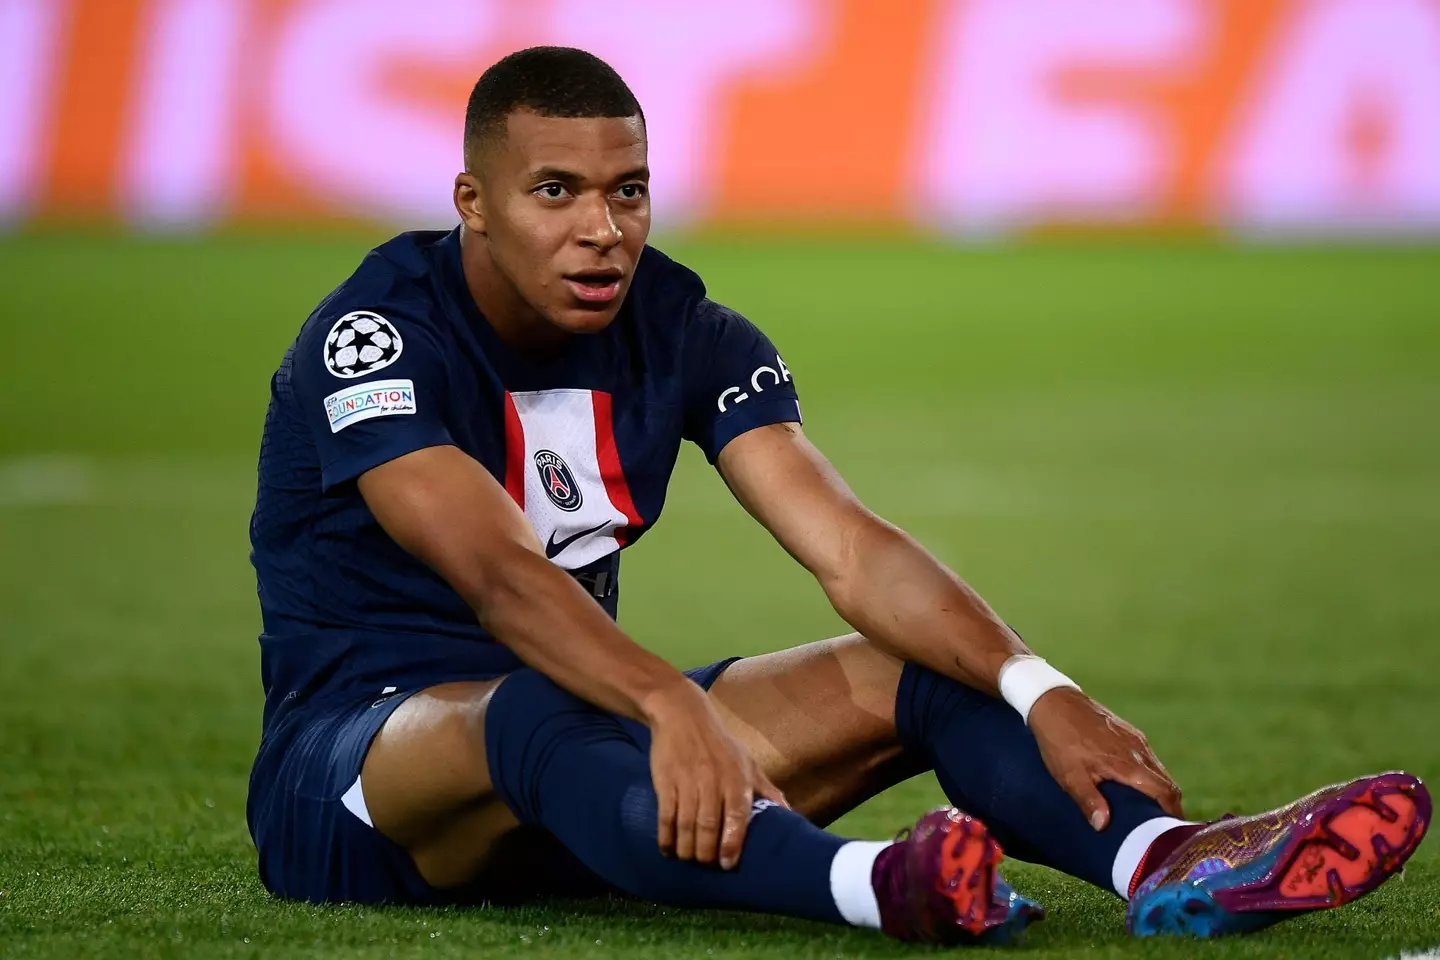 Mbappe is on a lucrative contract at the Parc des Princes. (Image